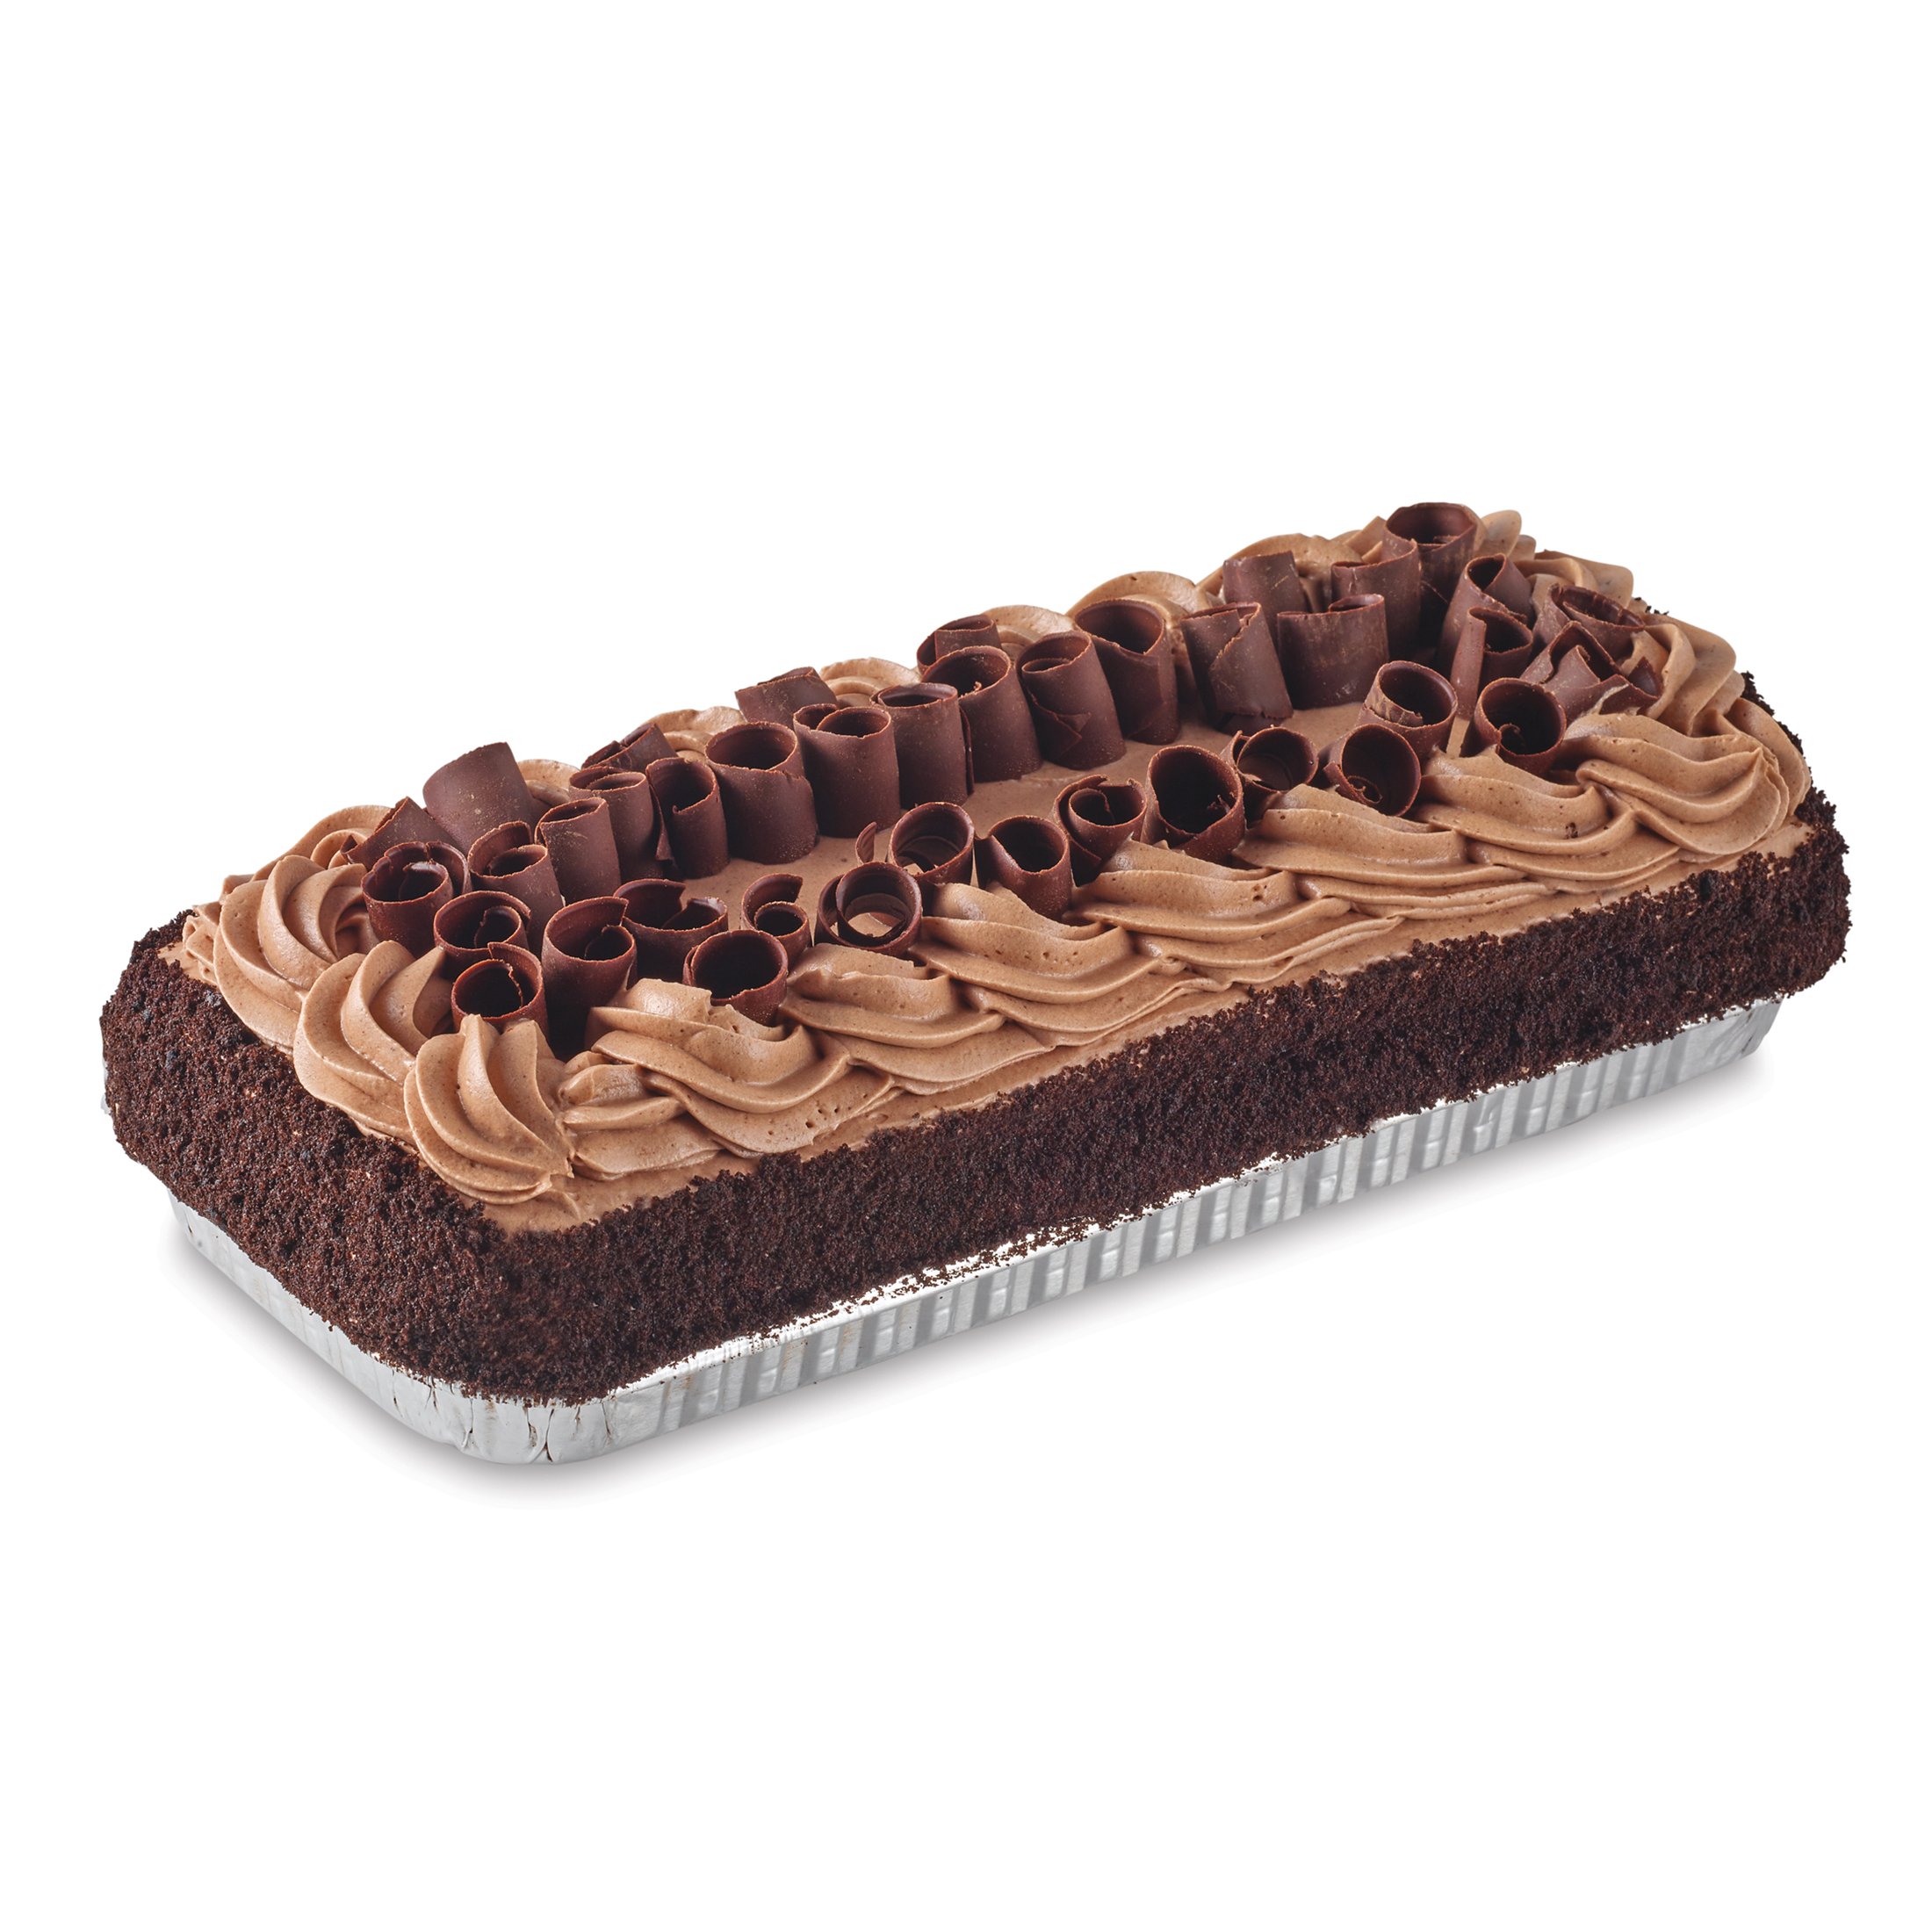 H-E-B Bakery Chocolate Tres Leches Cake - Shop Standard Cakes at H-E-B